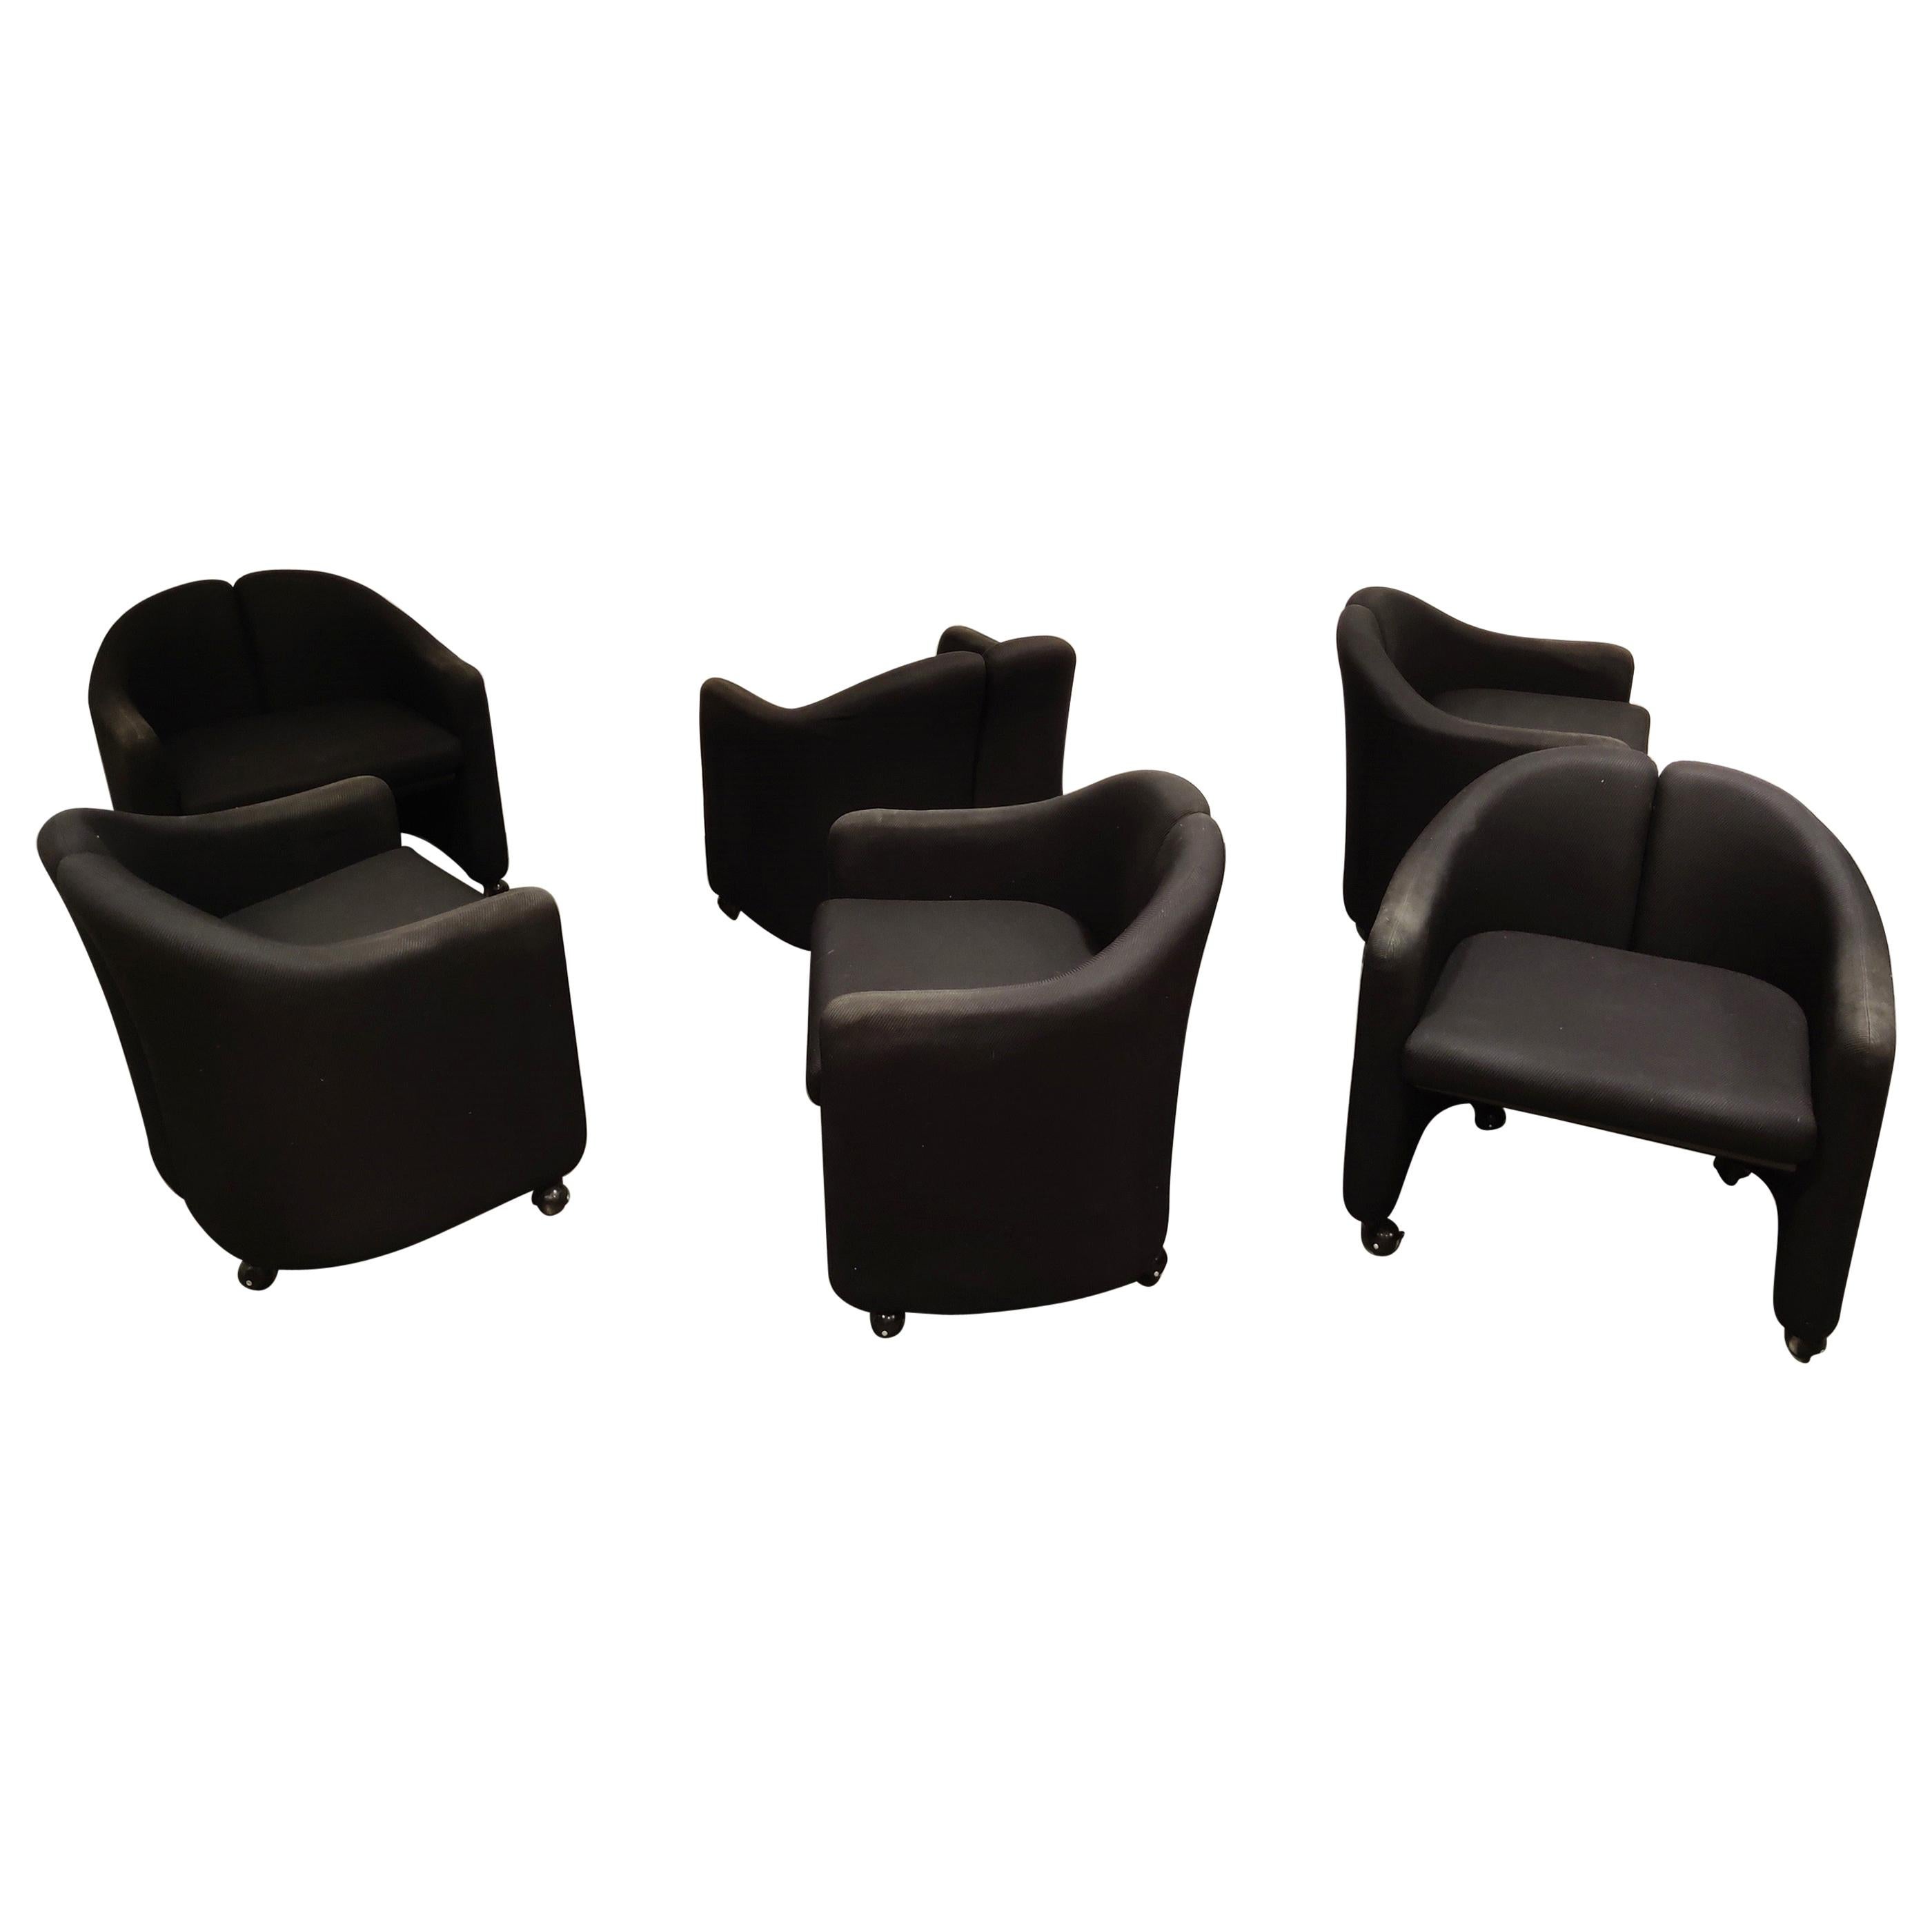 Black fabric armchairs designed by Eugenio Gerlio for Tecno, Italy.

These beautiful 'split back' armchairs sit very comfortable.

Good overall condition with minor wear on the armrests.

Labeled.

1980s, Italy

Dimensions:
Height 27 in.